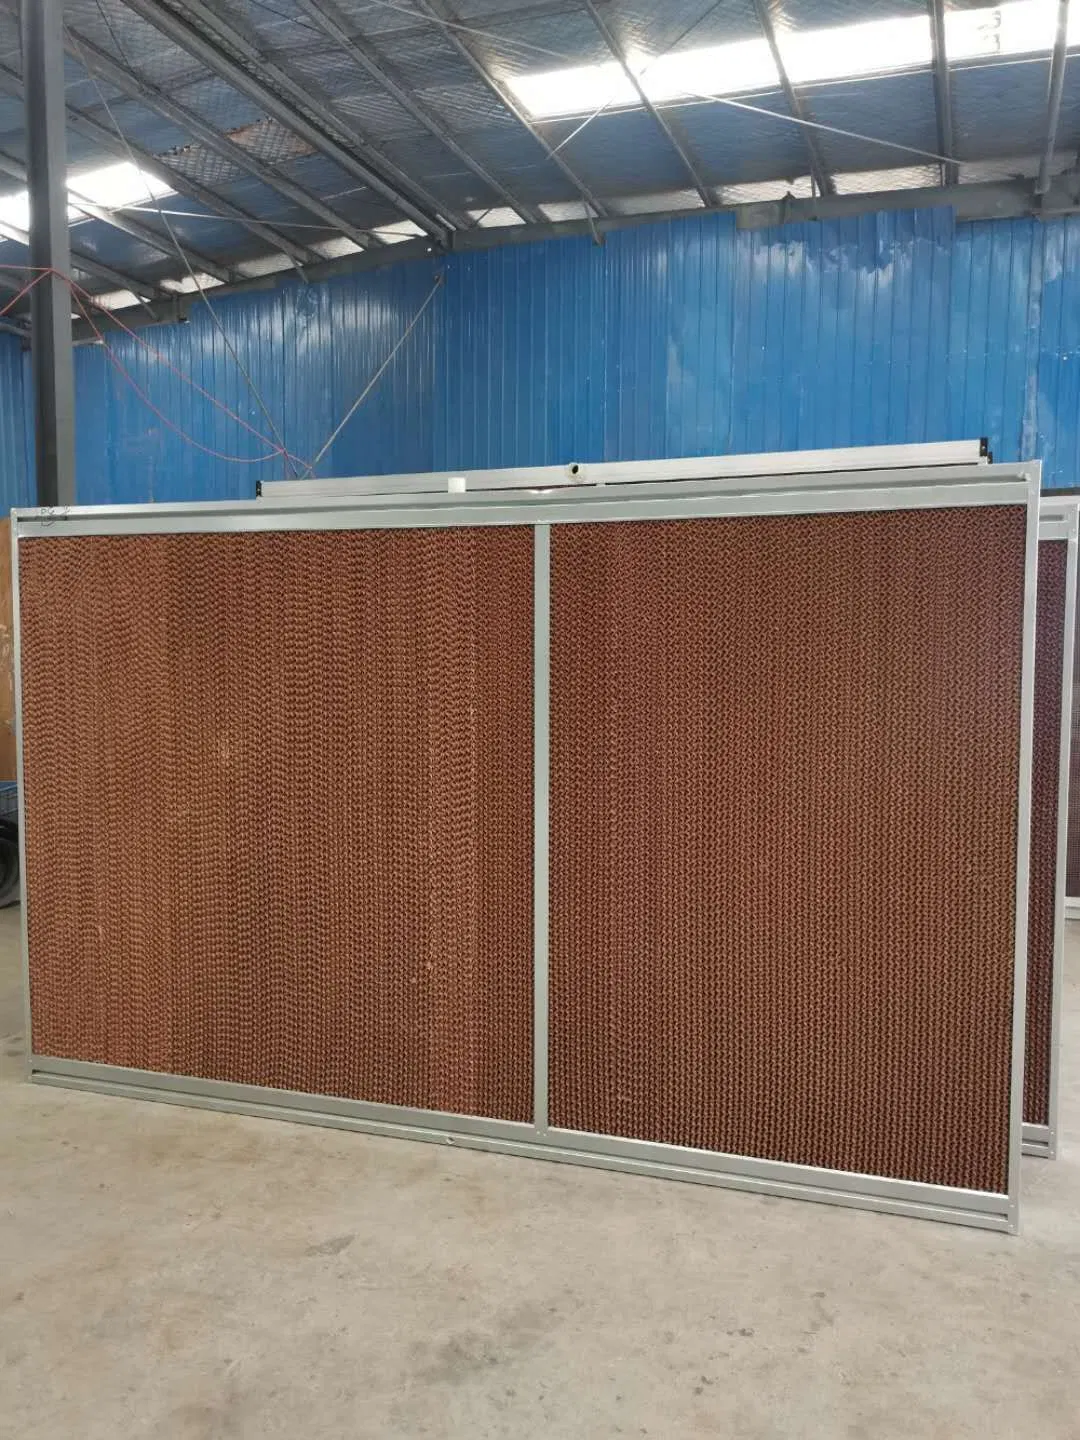 Greenhouse Cooling System Evaporative Wet Curtain/Cooling Pad for Agriculture/Farm